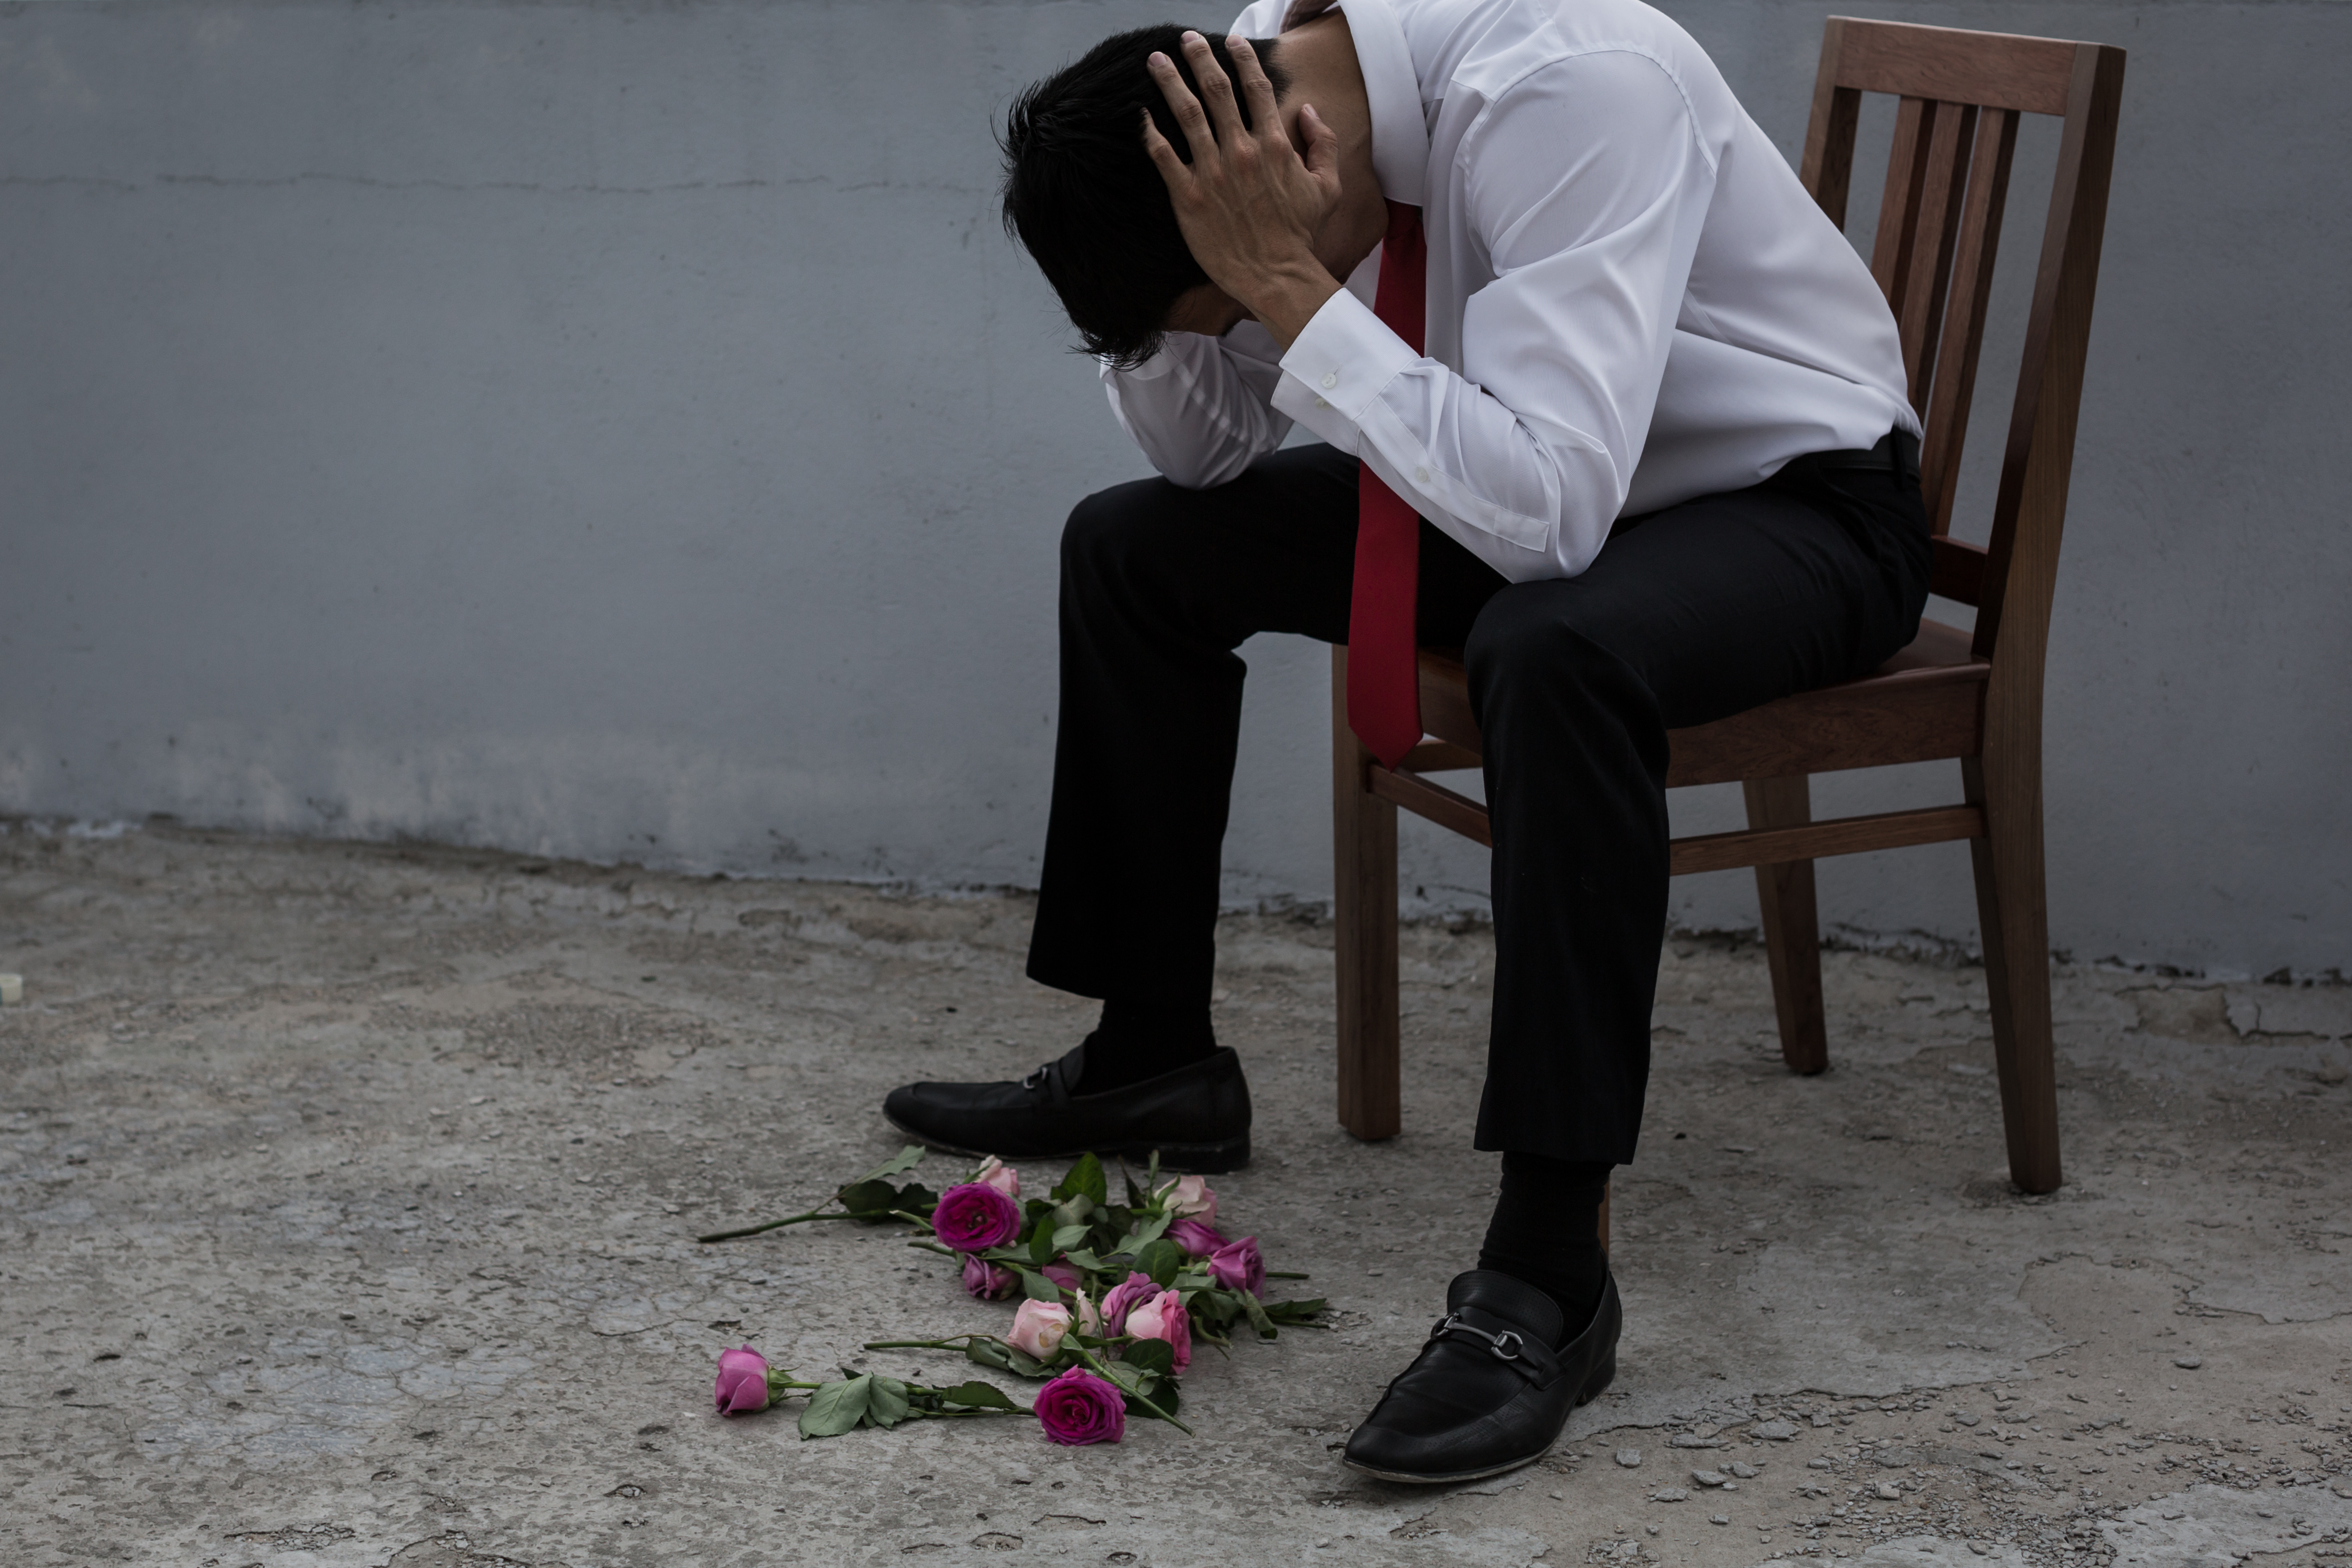 A disheartened man broken-hearted after being rejected | Source: Shutterstock